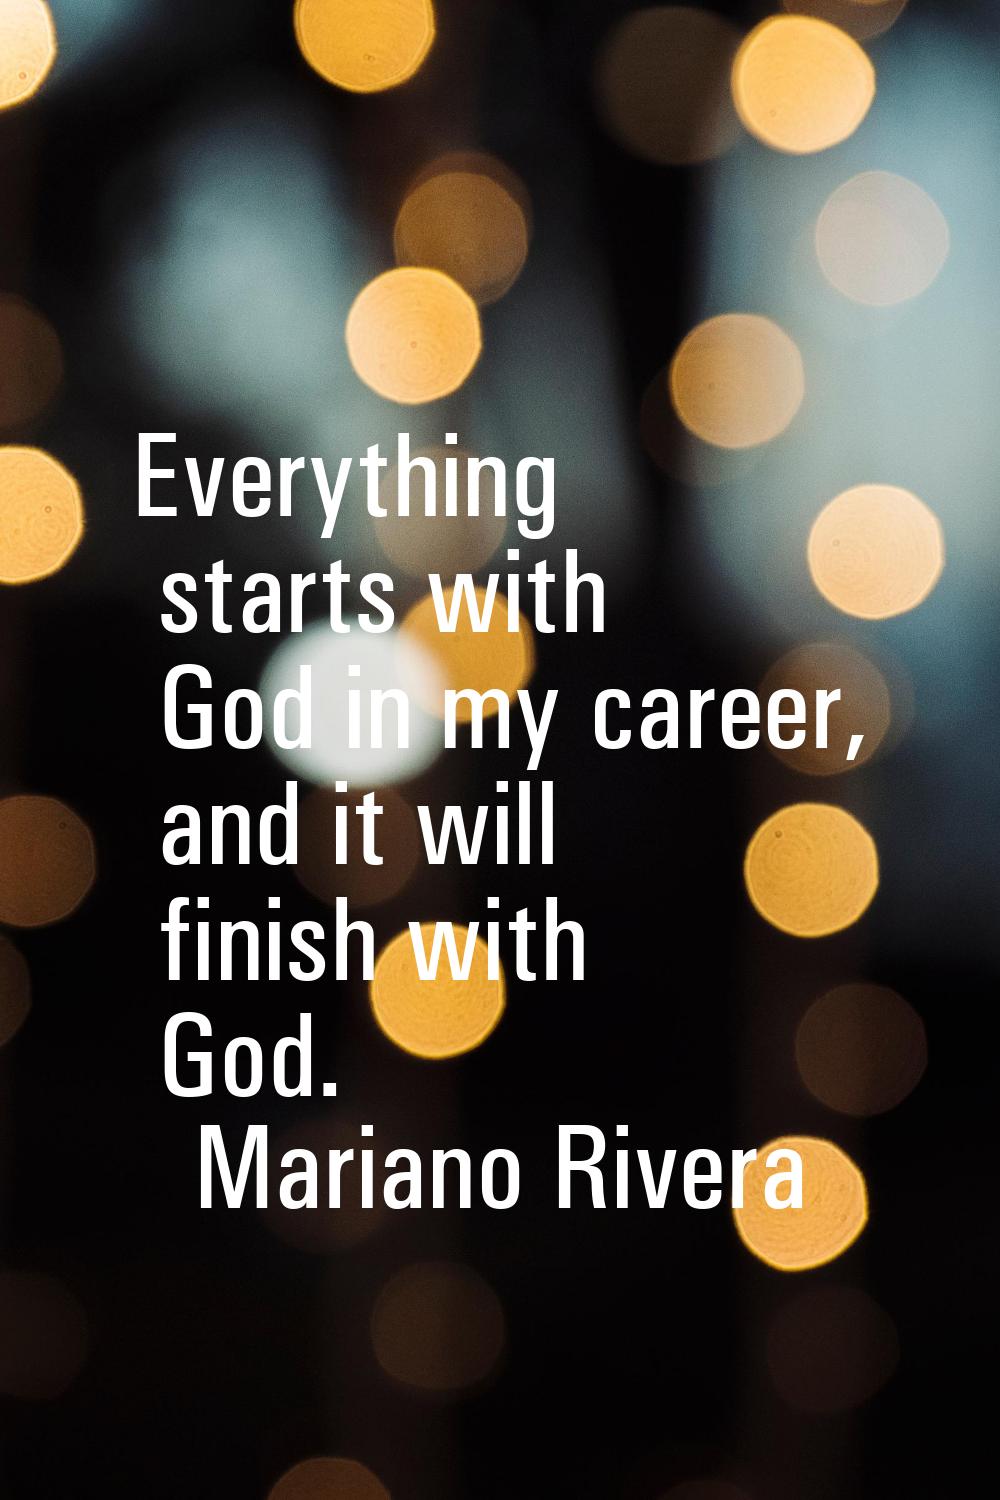 Everything starts with God in my career, and it will finish with God.